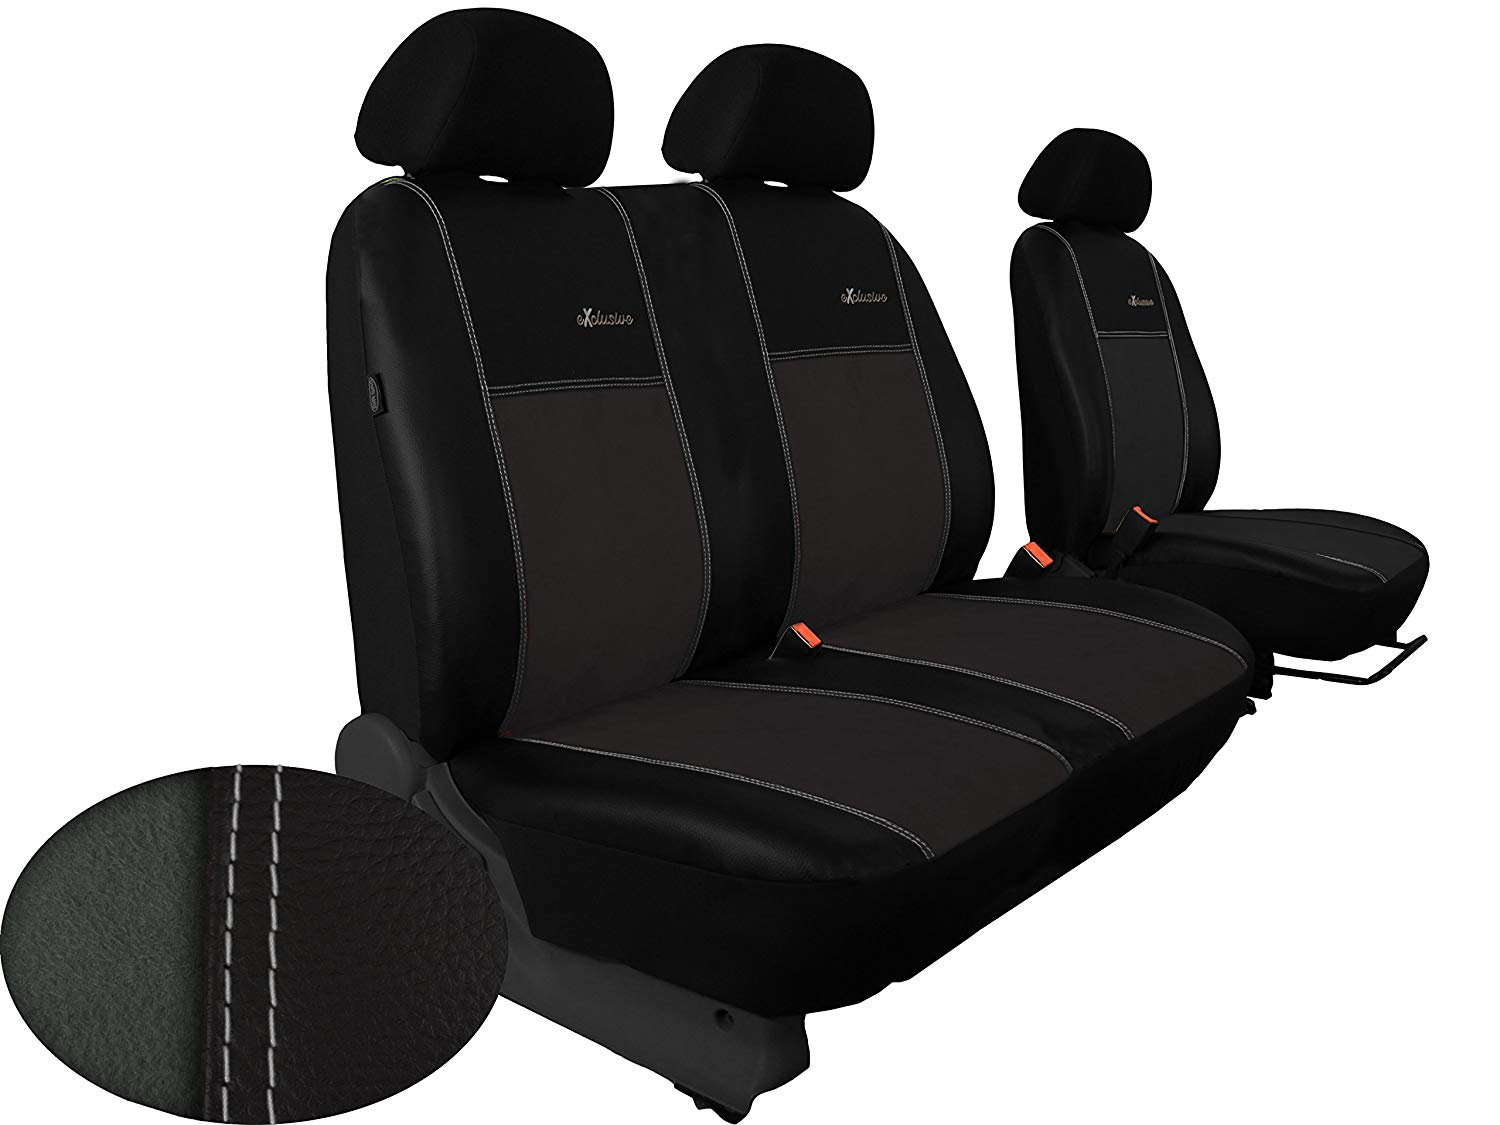 Car seat covers 1 + 2 Alcantara Suitable for CITROEN JUMPY. Includes Grey (Available in 5 FARBE5911990009391 N Other Offers). Car Seat Cover Driver Seat + 2 Passenger Bench Headrest III